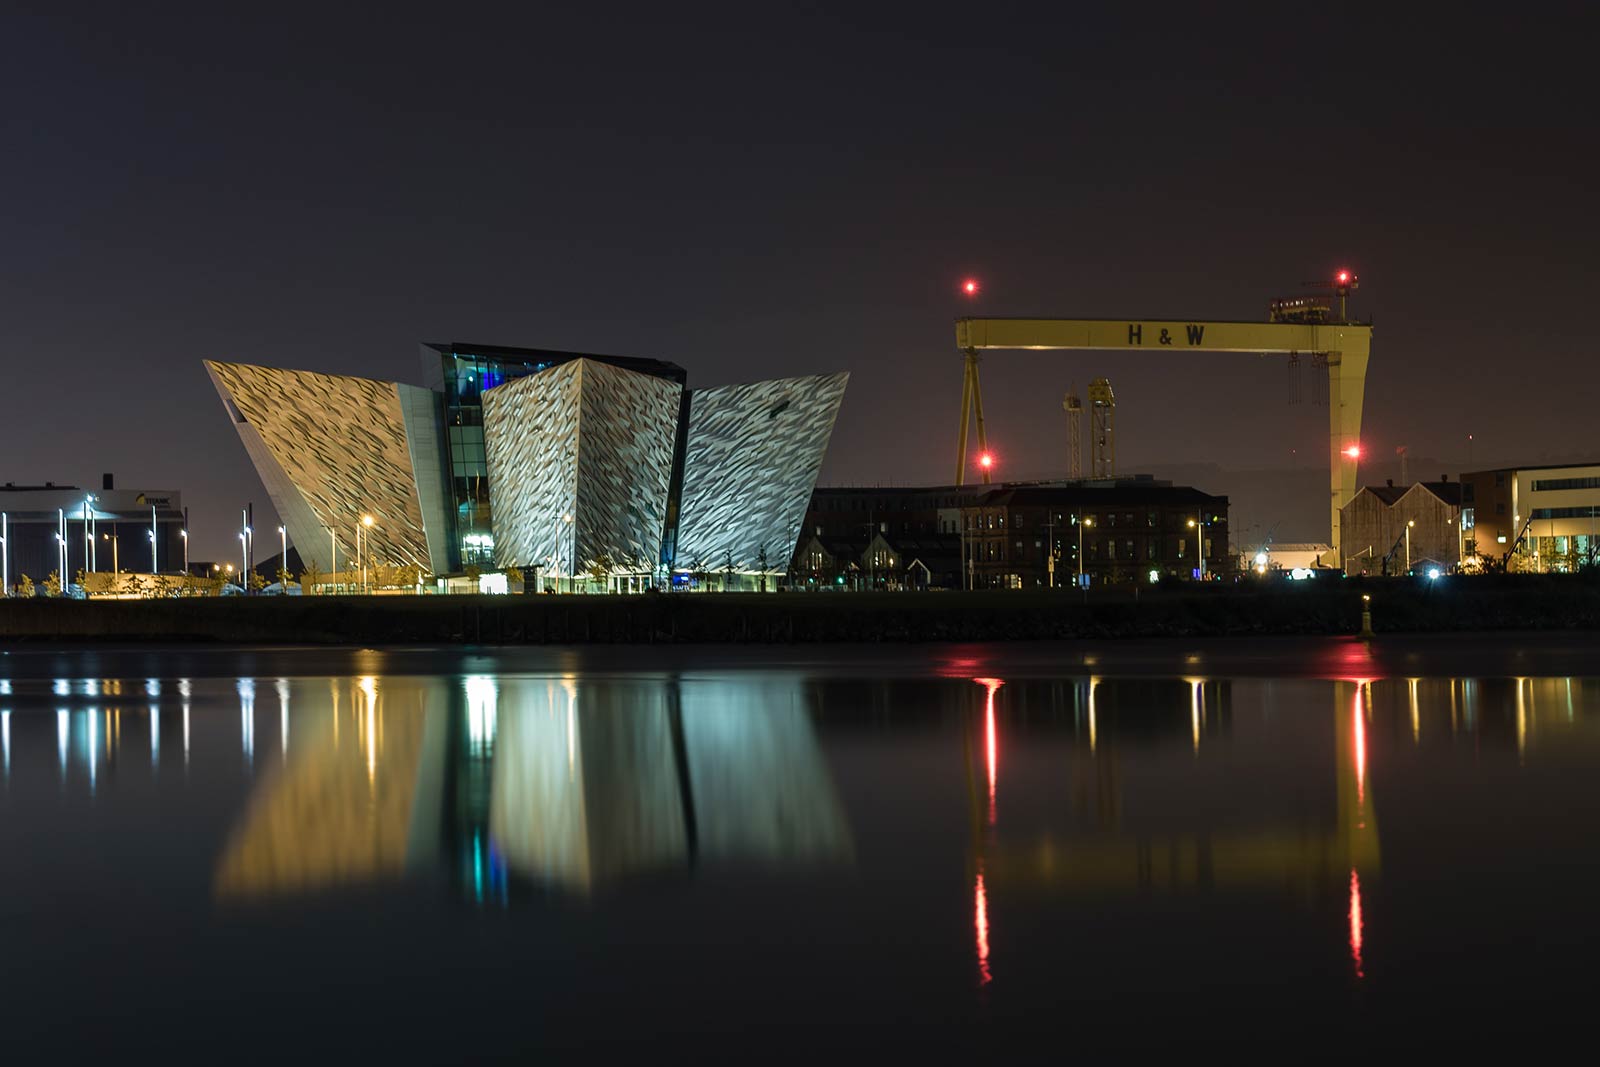 Titanic Belfast at night in Belfast, Northern Ireland. 24hrs itinerary for Belfast, drinks and petrol bombs